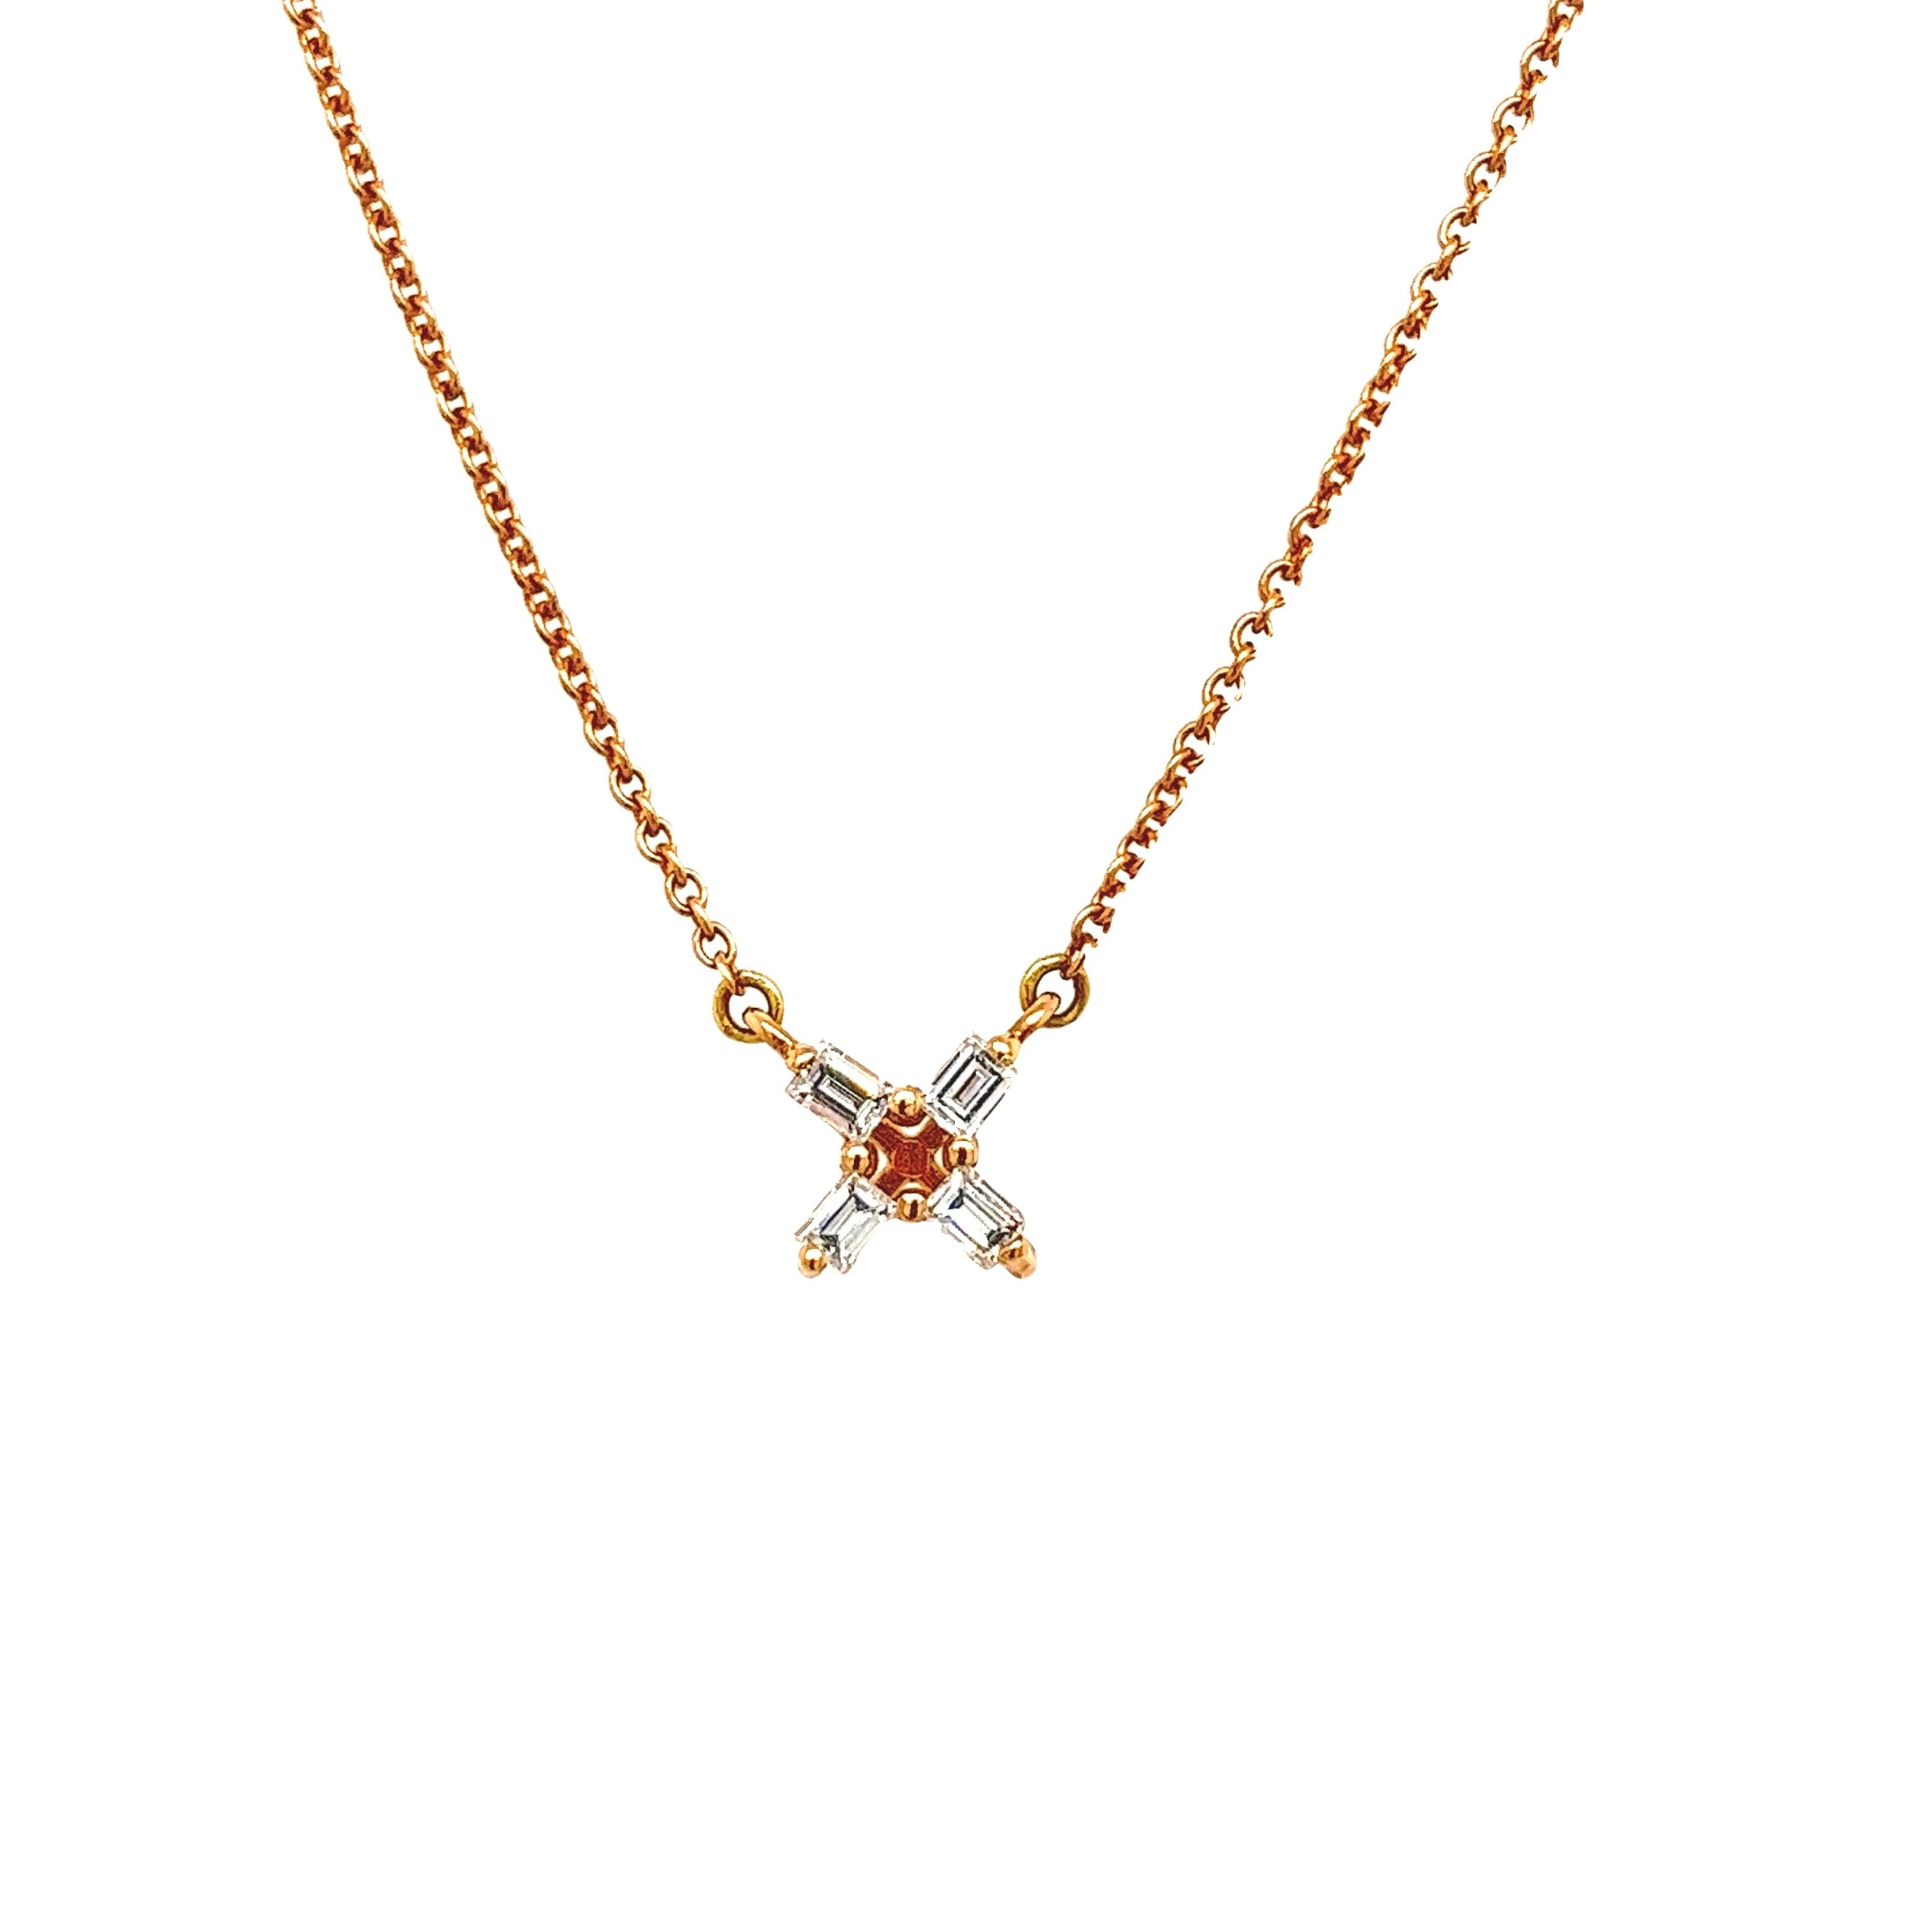 18ct Rose Gold Fine Quality Diamond Baguette Necklace Set With 0.20ct Diamonds

Additional Information:
Total Diamond Weight: 0.20ct
Diamond Colour: G
Diamond Clarity: VS
Total Weight: 2.1g
Chain Length: 16''
SMS2979